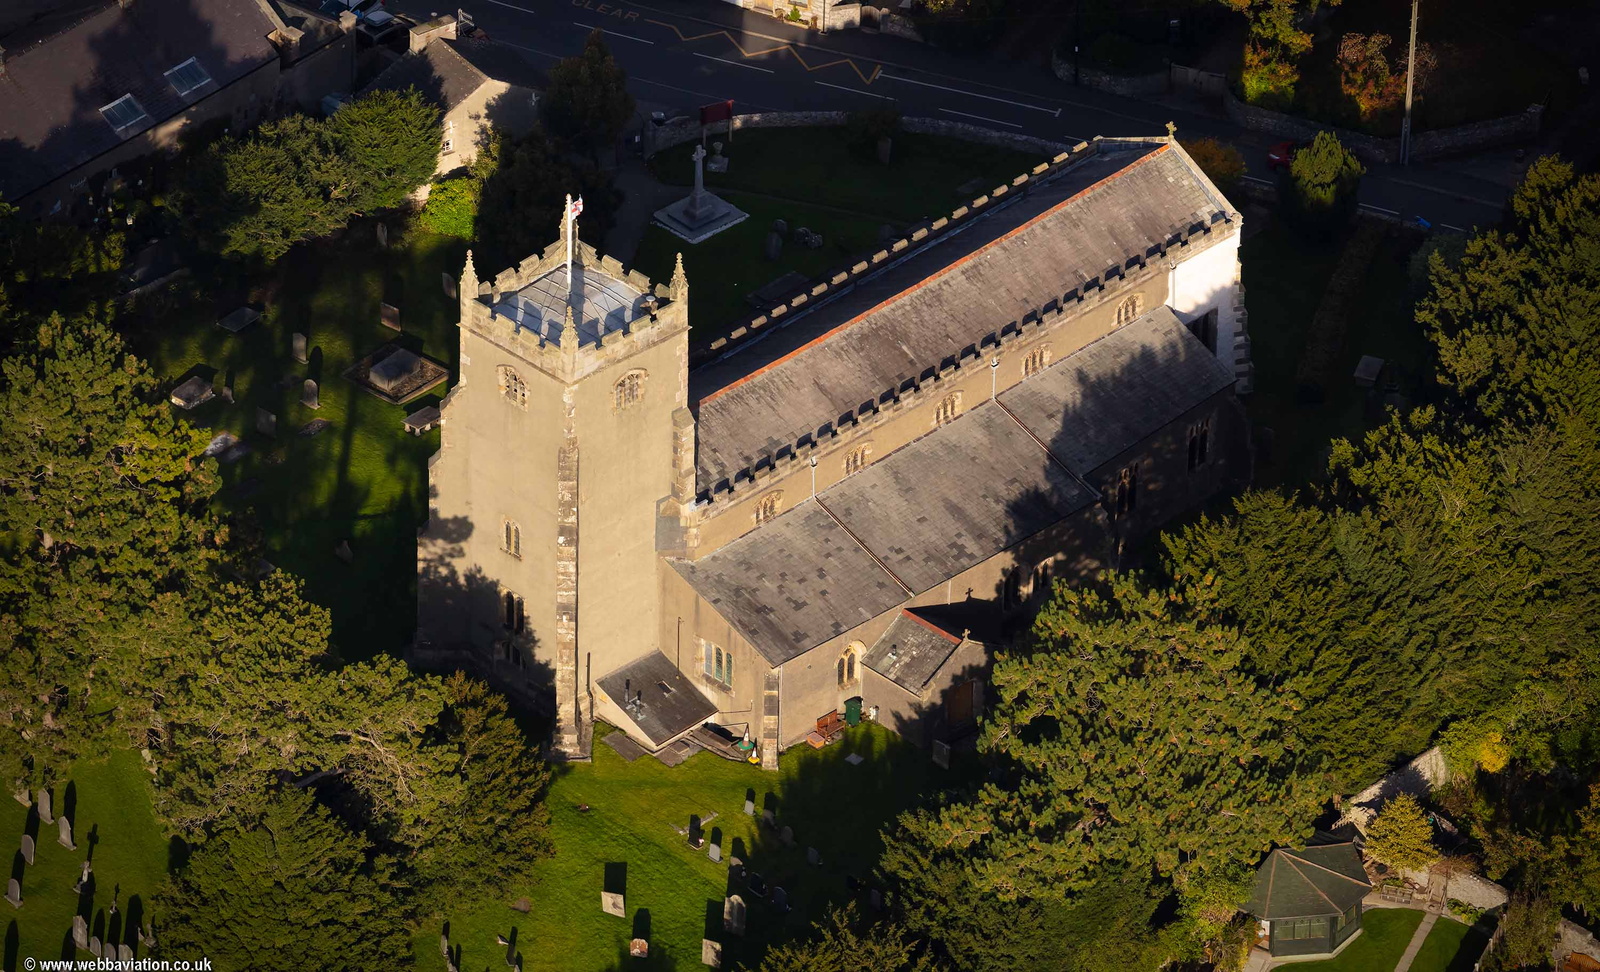 St Oswald's Church, Warton from the air